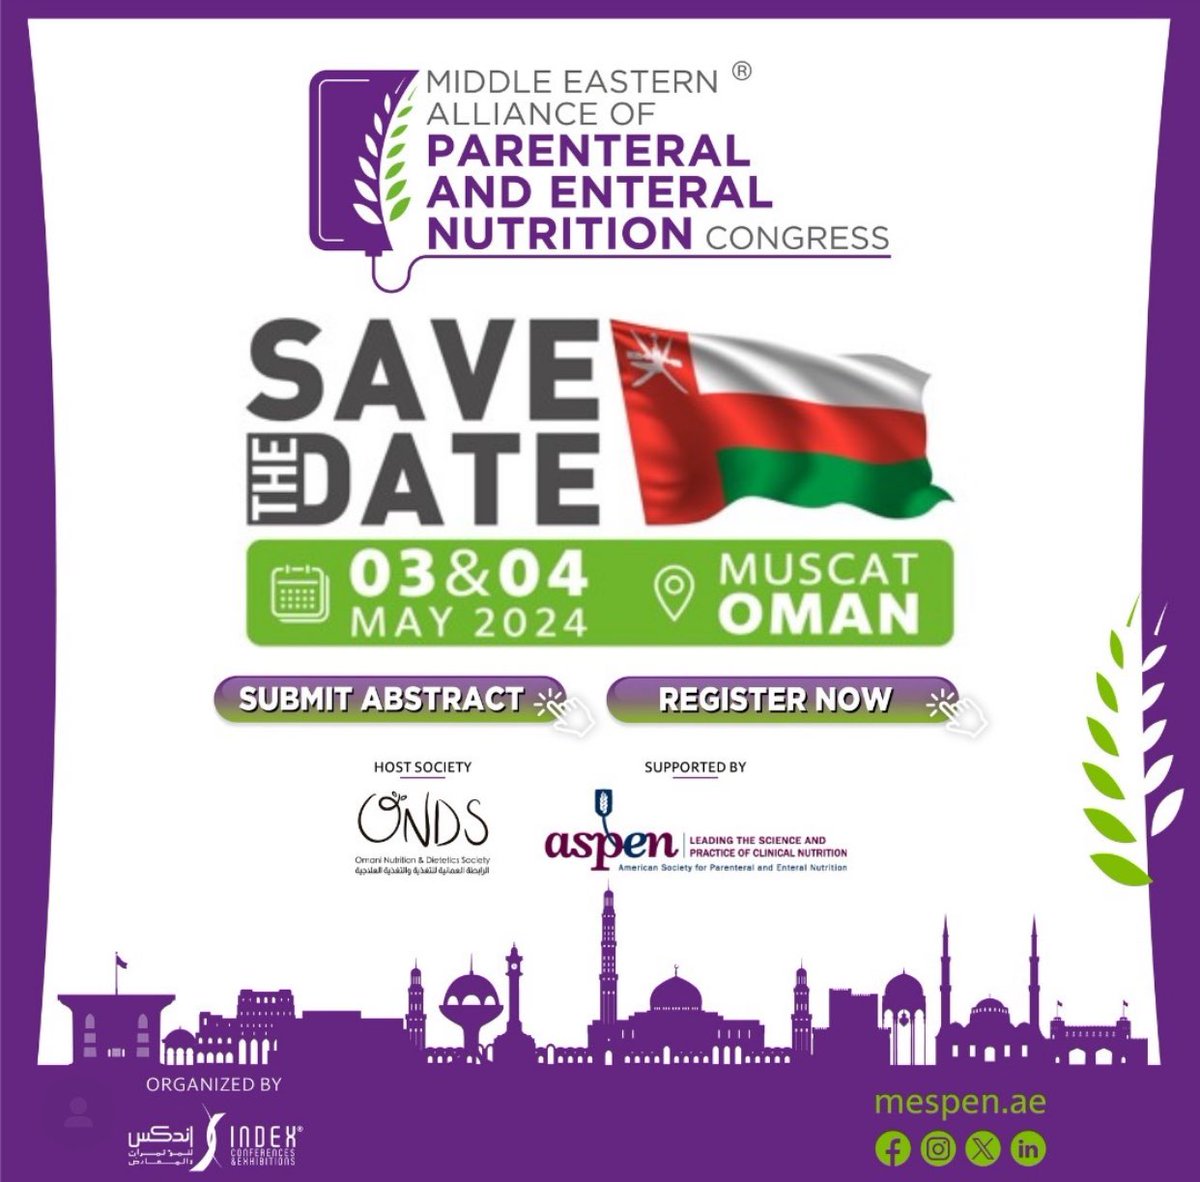 I'm delighted to one of the moderators 
the MEAPEN Congress 2024, on May 3rd & 4th, 2024 @Kempinski hotel, Muscat, Oman.
#MEAPEN2024
#NutritionResearch #nutrition #health #parenteralnutrition #onds #CME